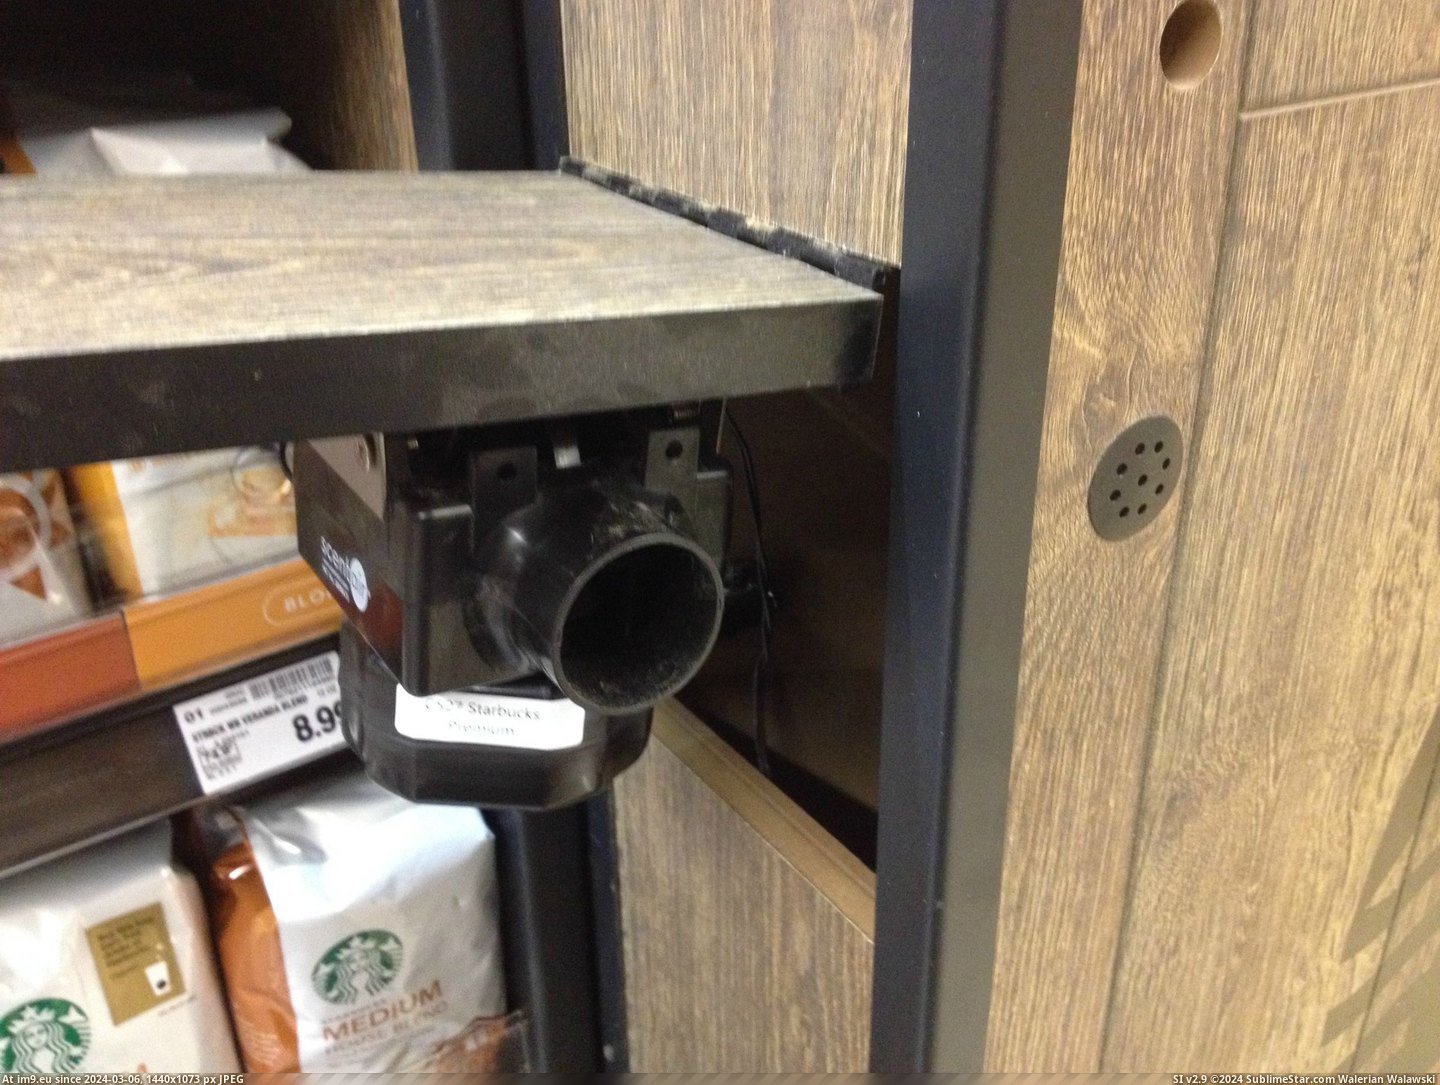 #Work #New #Secret #Smell #Delivery #Starbucks #Coffee #System #Display [Mildlyinteresting] The new Starbucks display at my work has a secret coffee smell delivery system. 5 Pic. (Obraz z album My r/MILDLYINTERESTING favs))